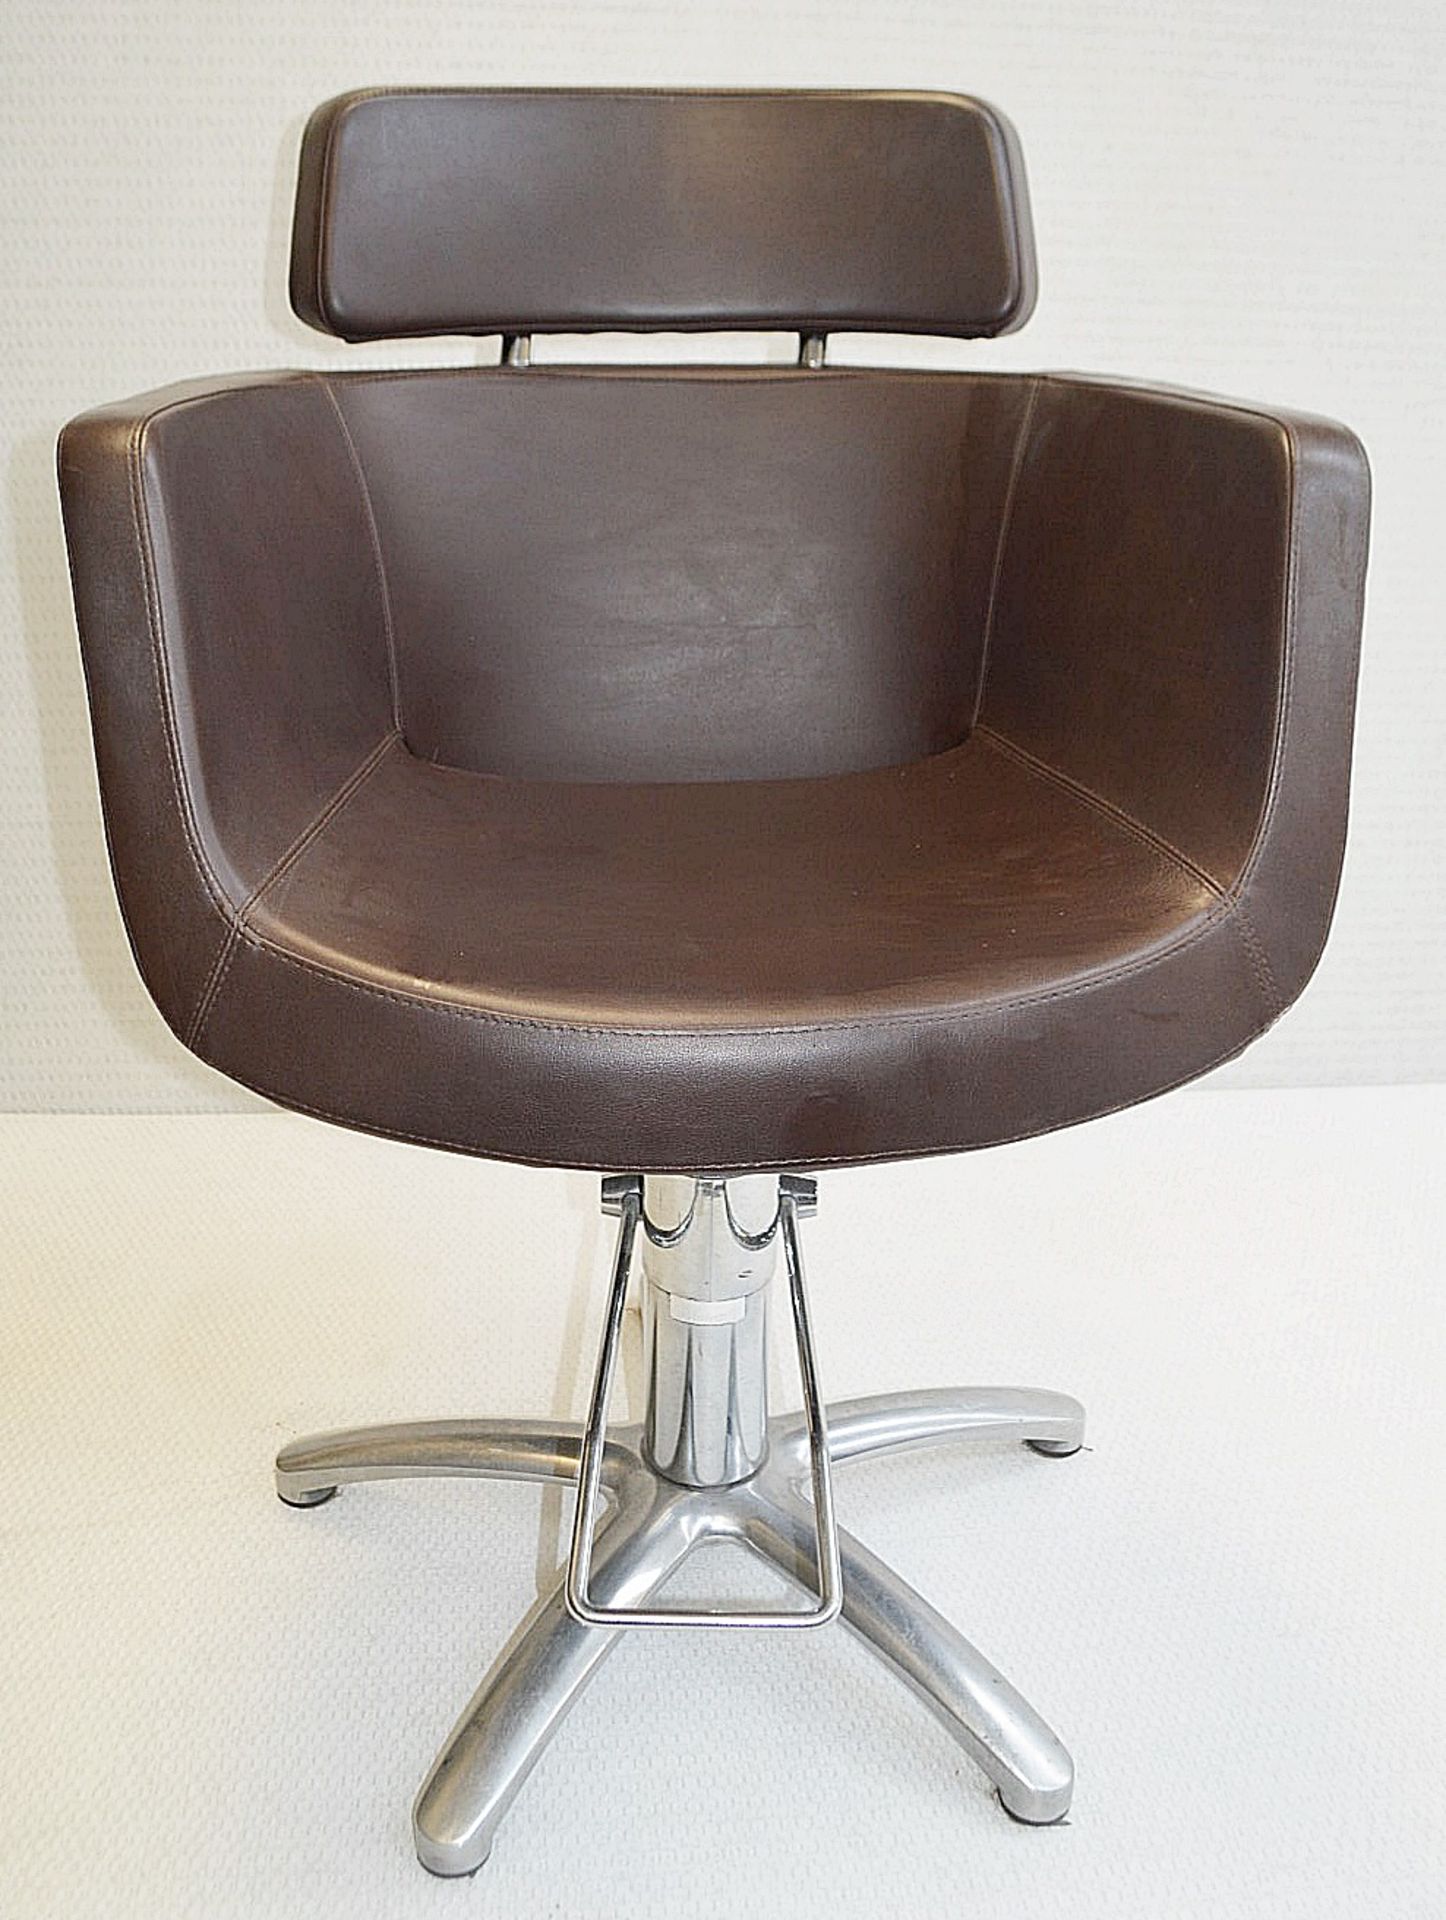 5 x Malet Branded Professional Hairdressing Salon Swivel Chairs In Brown - Includes 4 x Foot Rests - Image 3 of 7